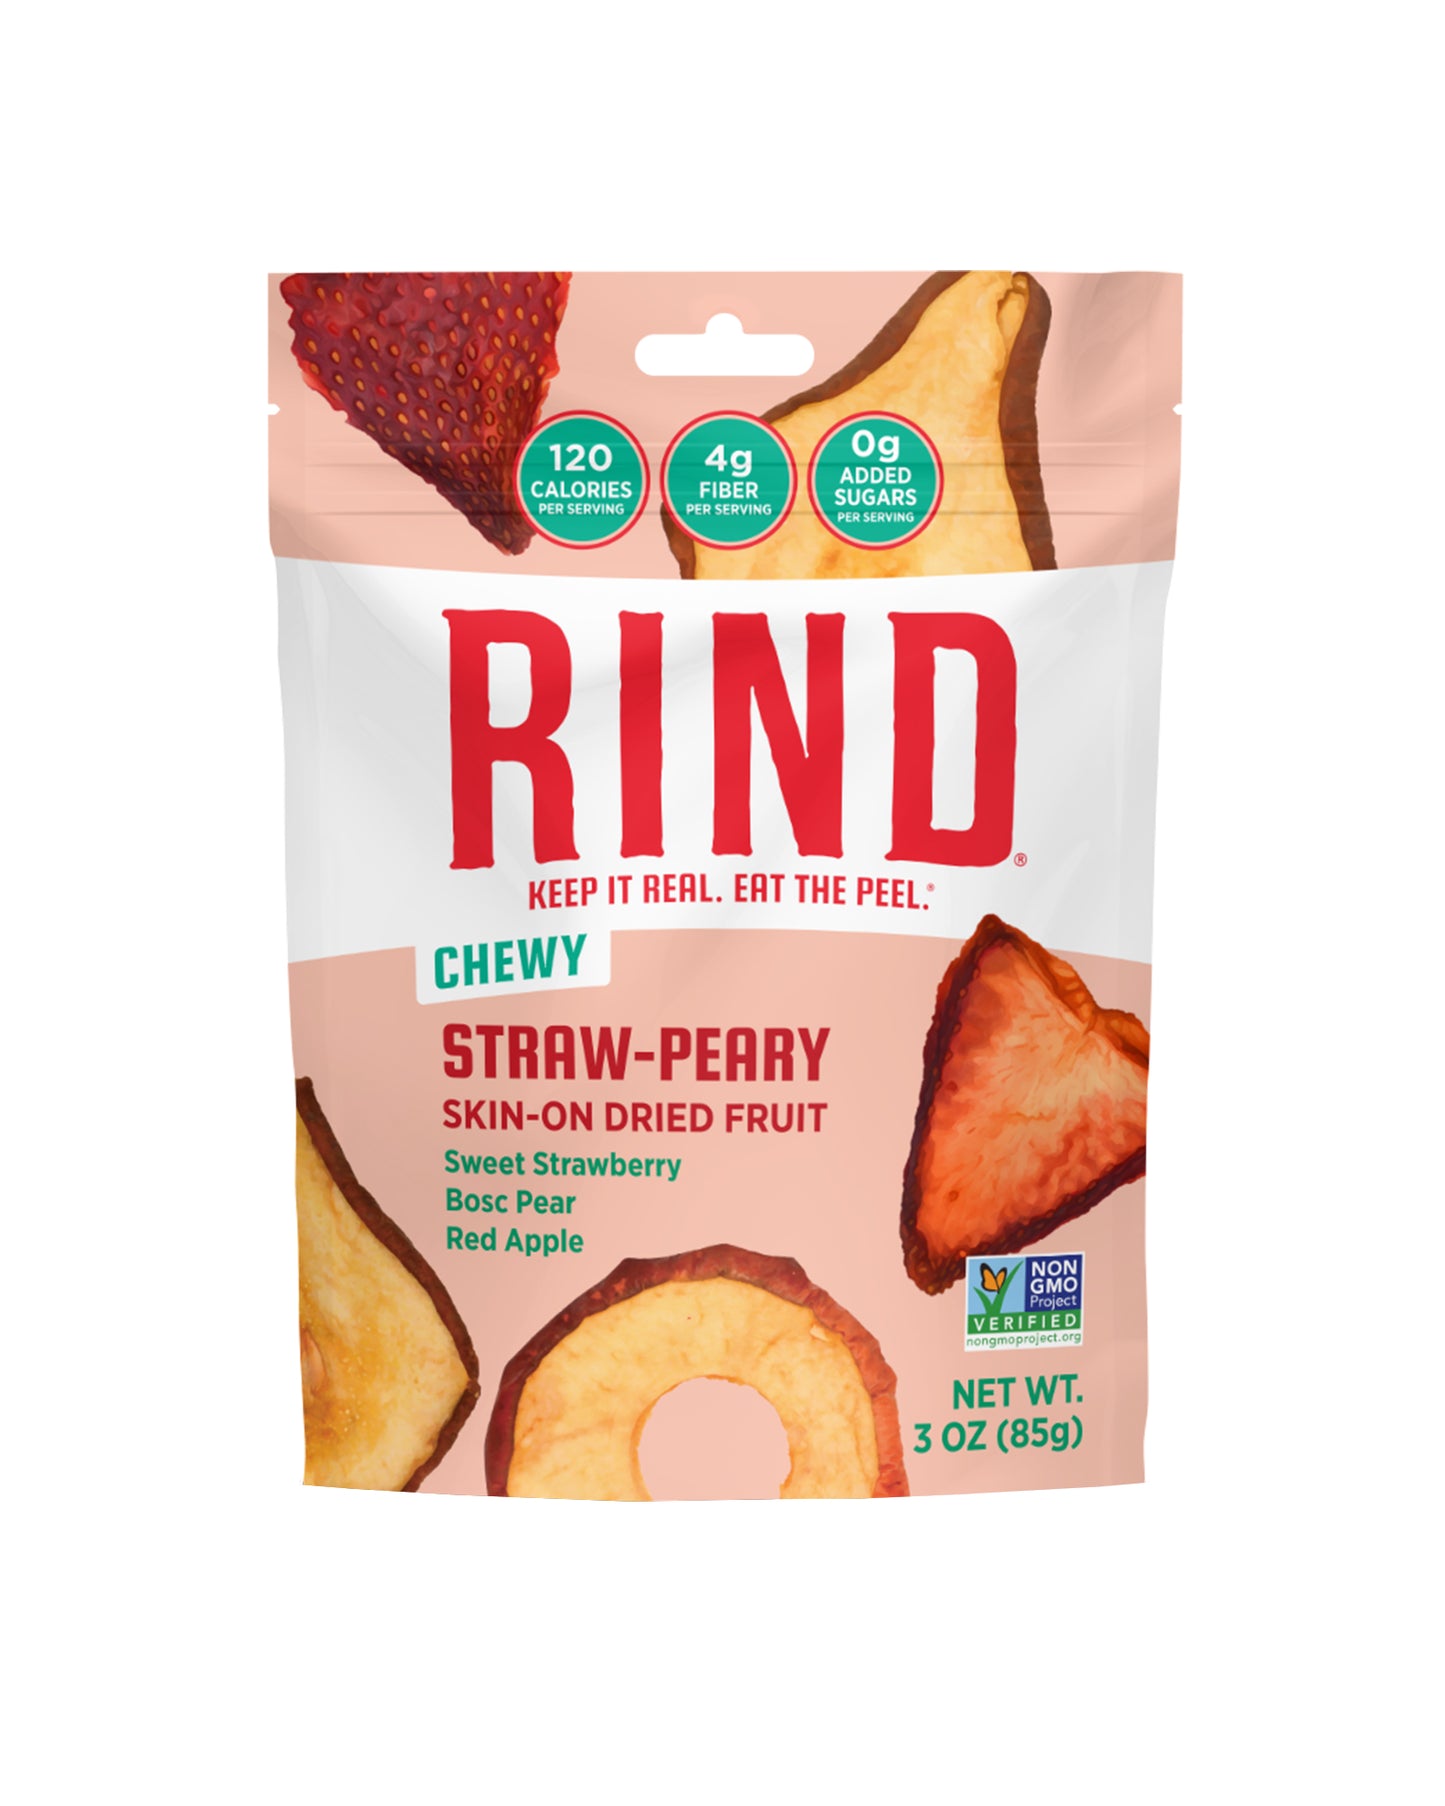 Straw-Peary Sun-Dried Superfruit Blend